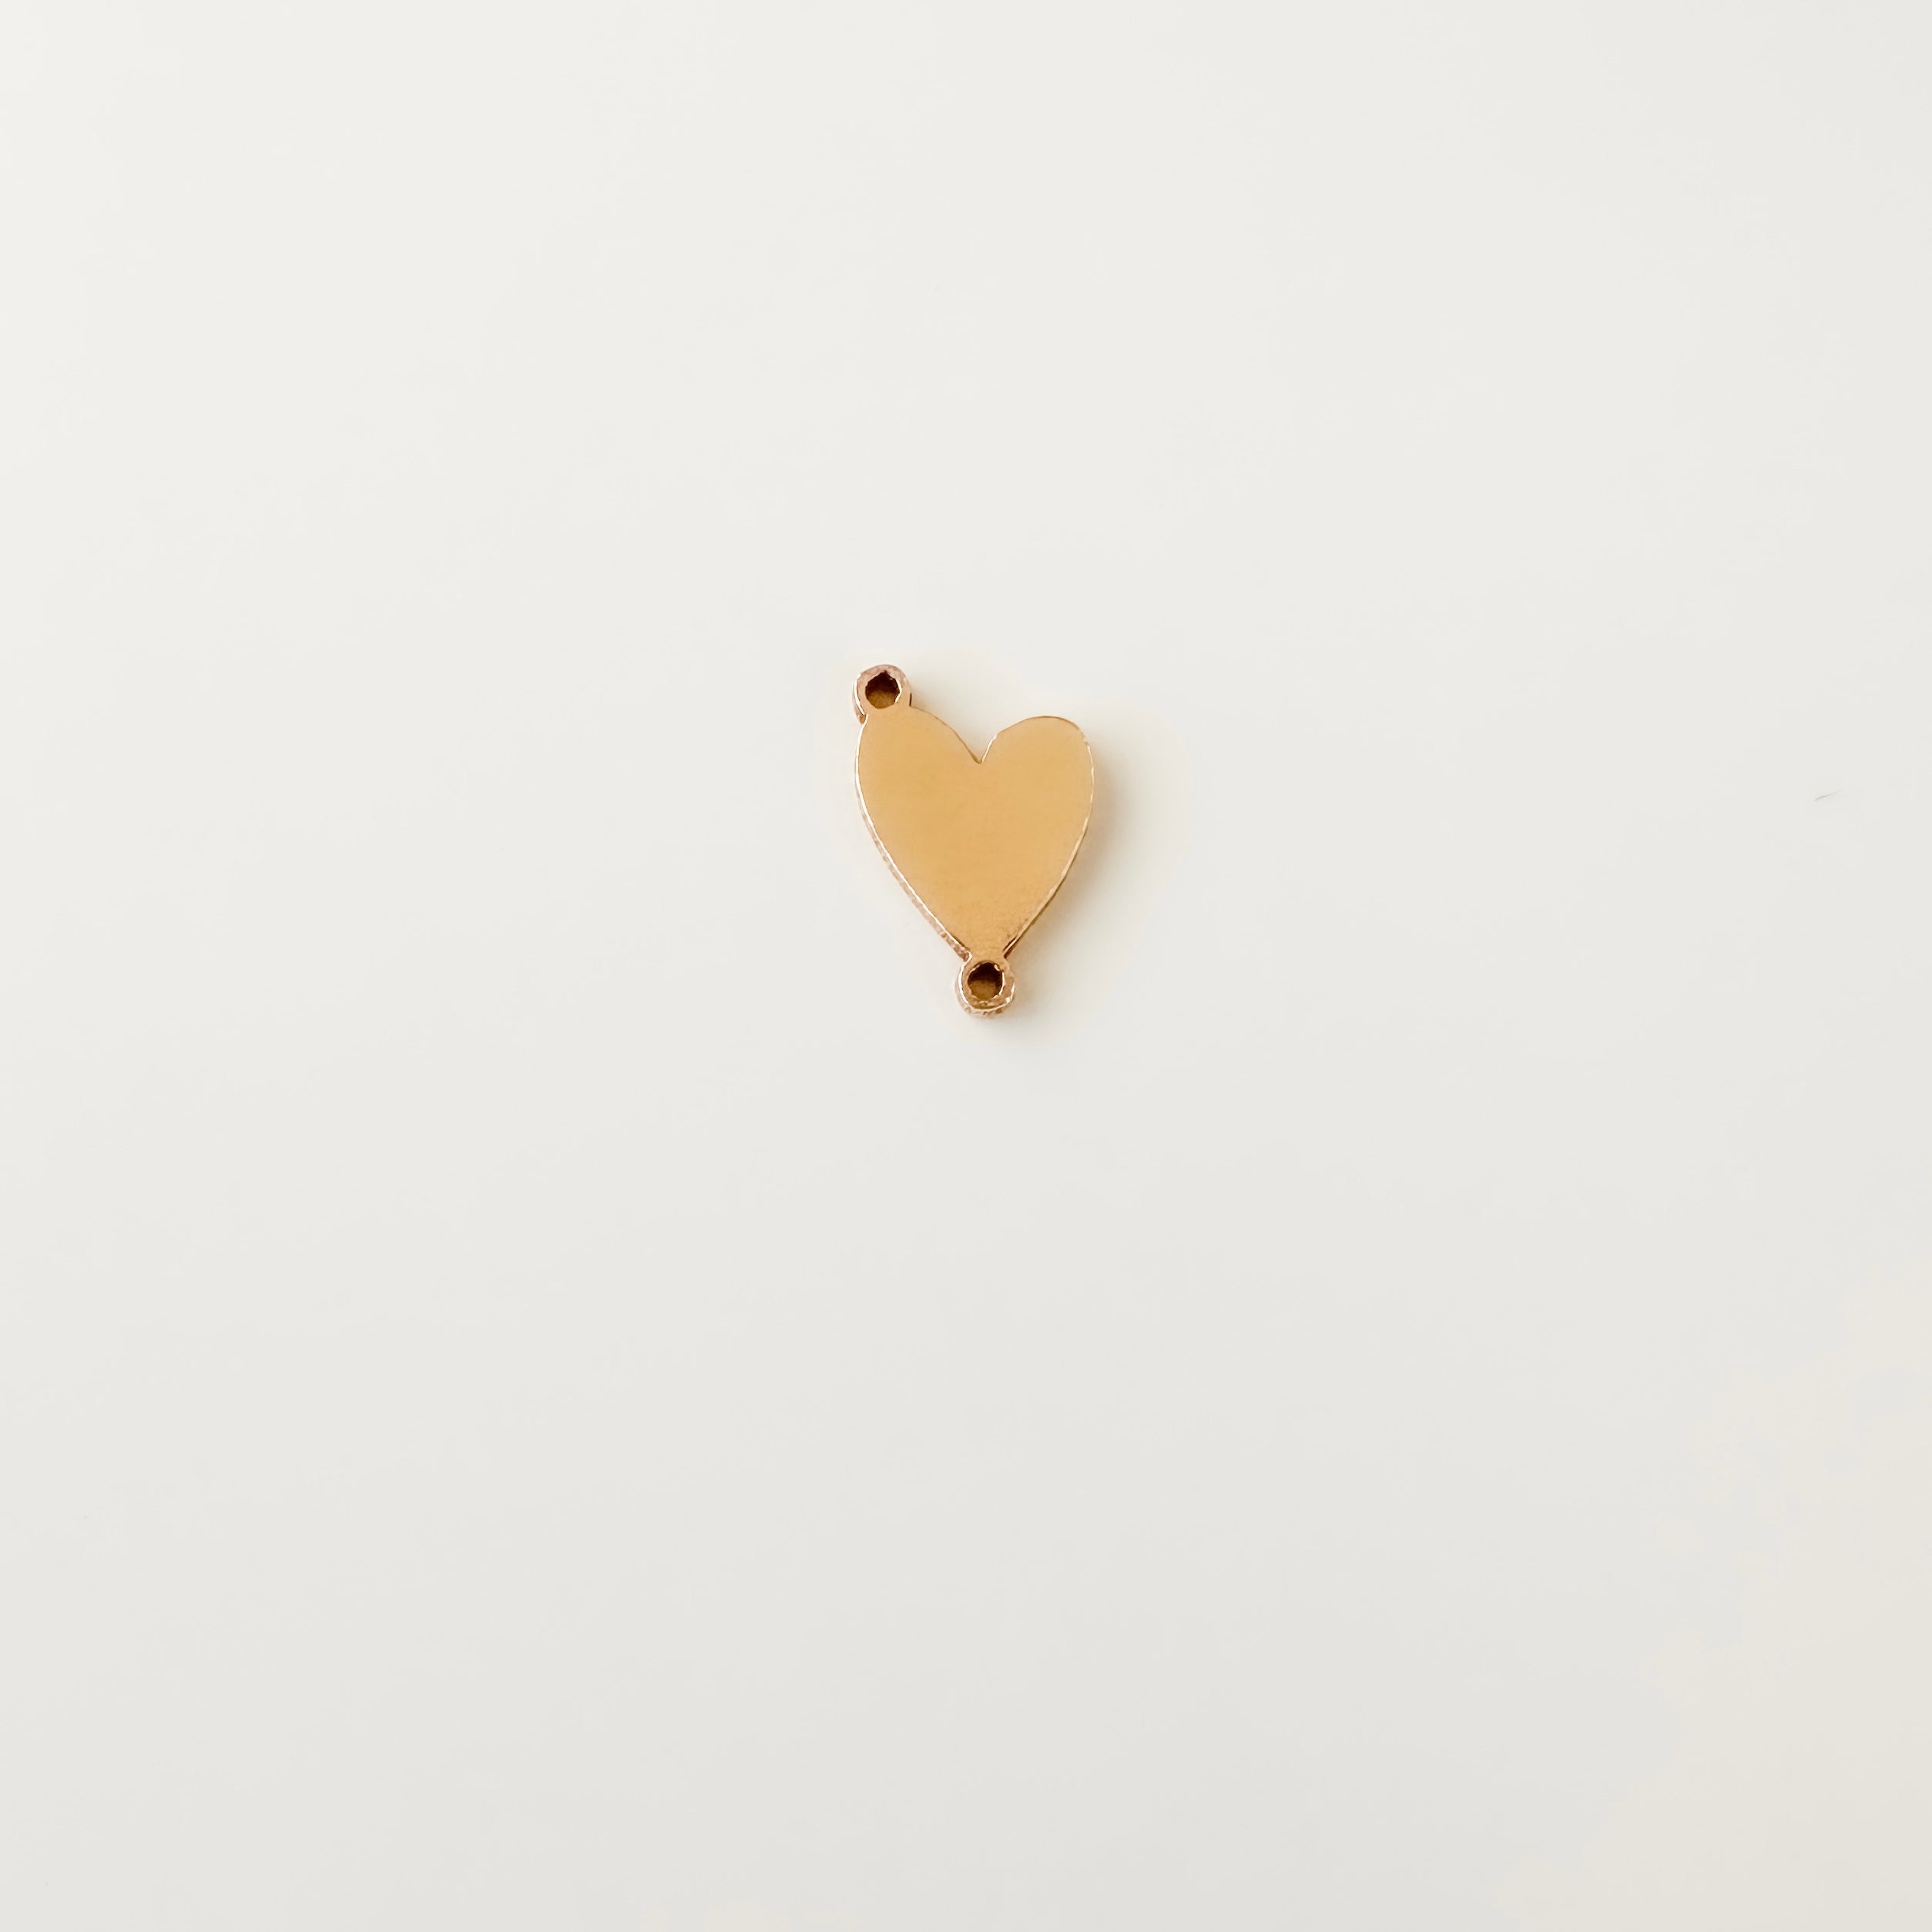 heart charm, heart connector, gold filled heart connector, permanent jewelry supplier, essbe, essbe charm